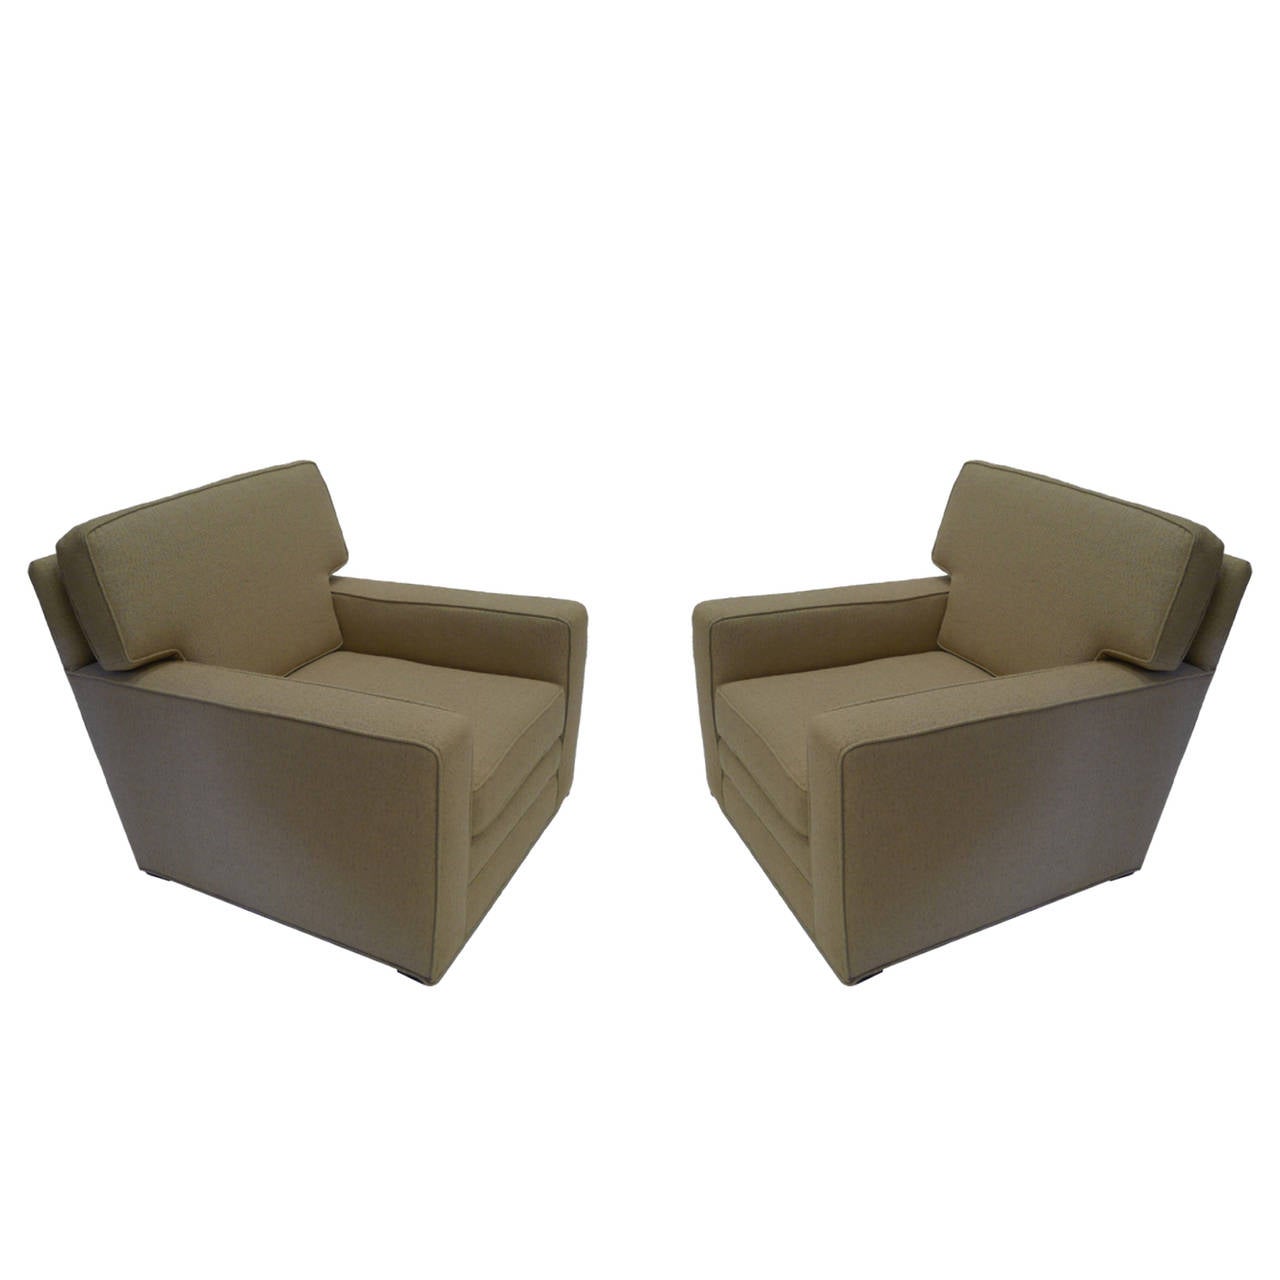 American Handsome Pair of Newly Upholstered Art Deco Modernage Lounge Chairs